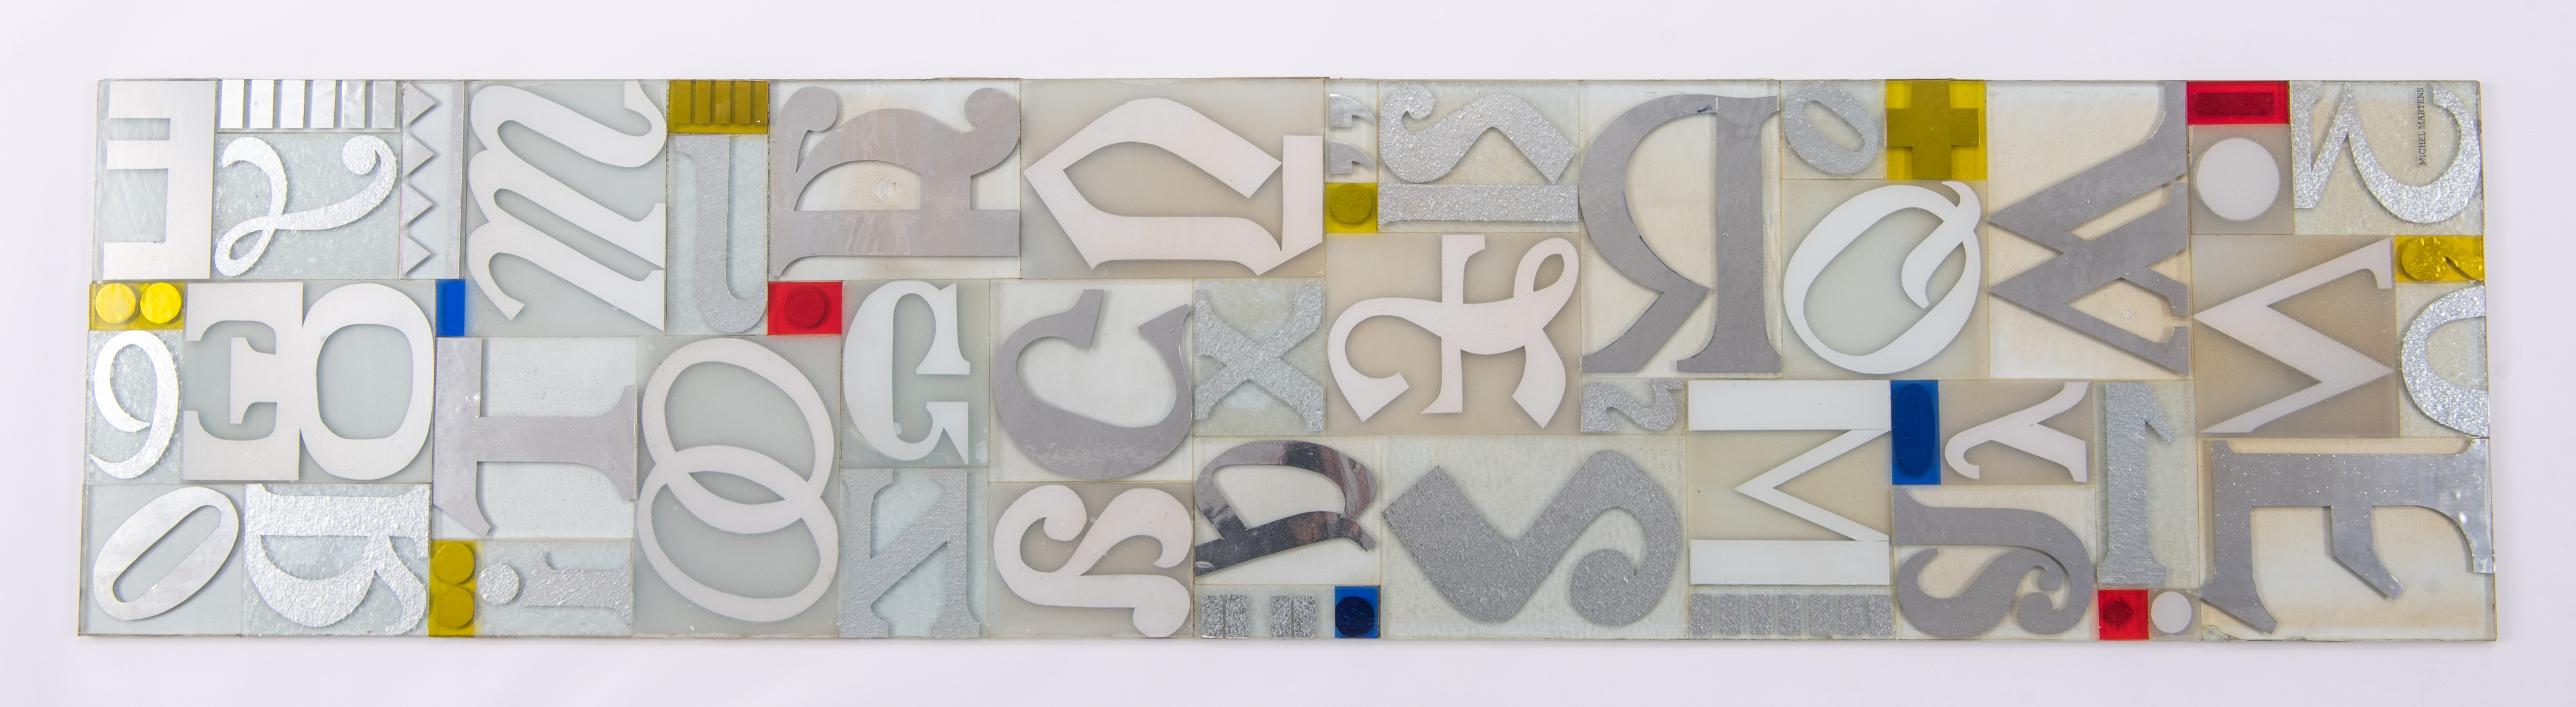 Michel Martens, a large glass sculpture with severalÿpunctuation marks, coloured, frosted and sandbl - Image 11 of 12